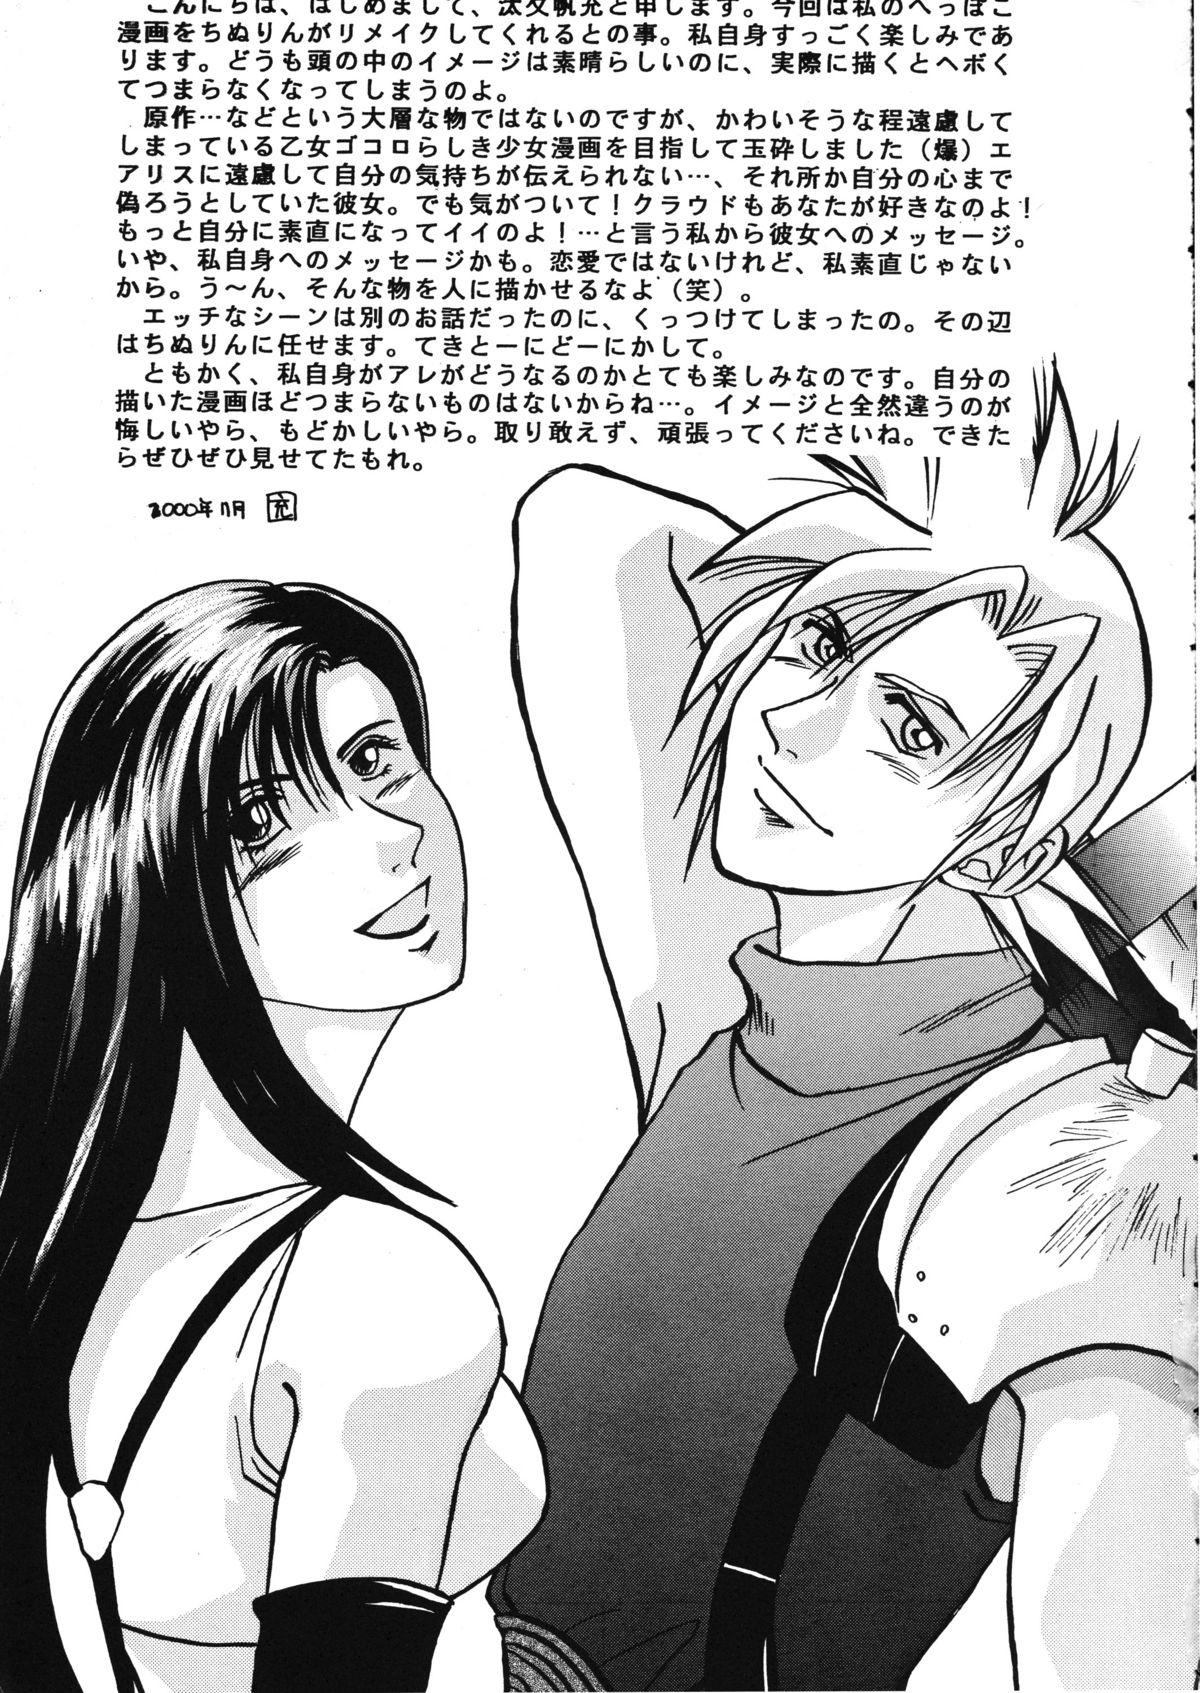 Pool Forever Together - Final fantasy vii Ghetto - Page 5